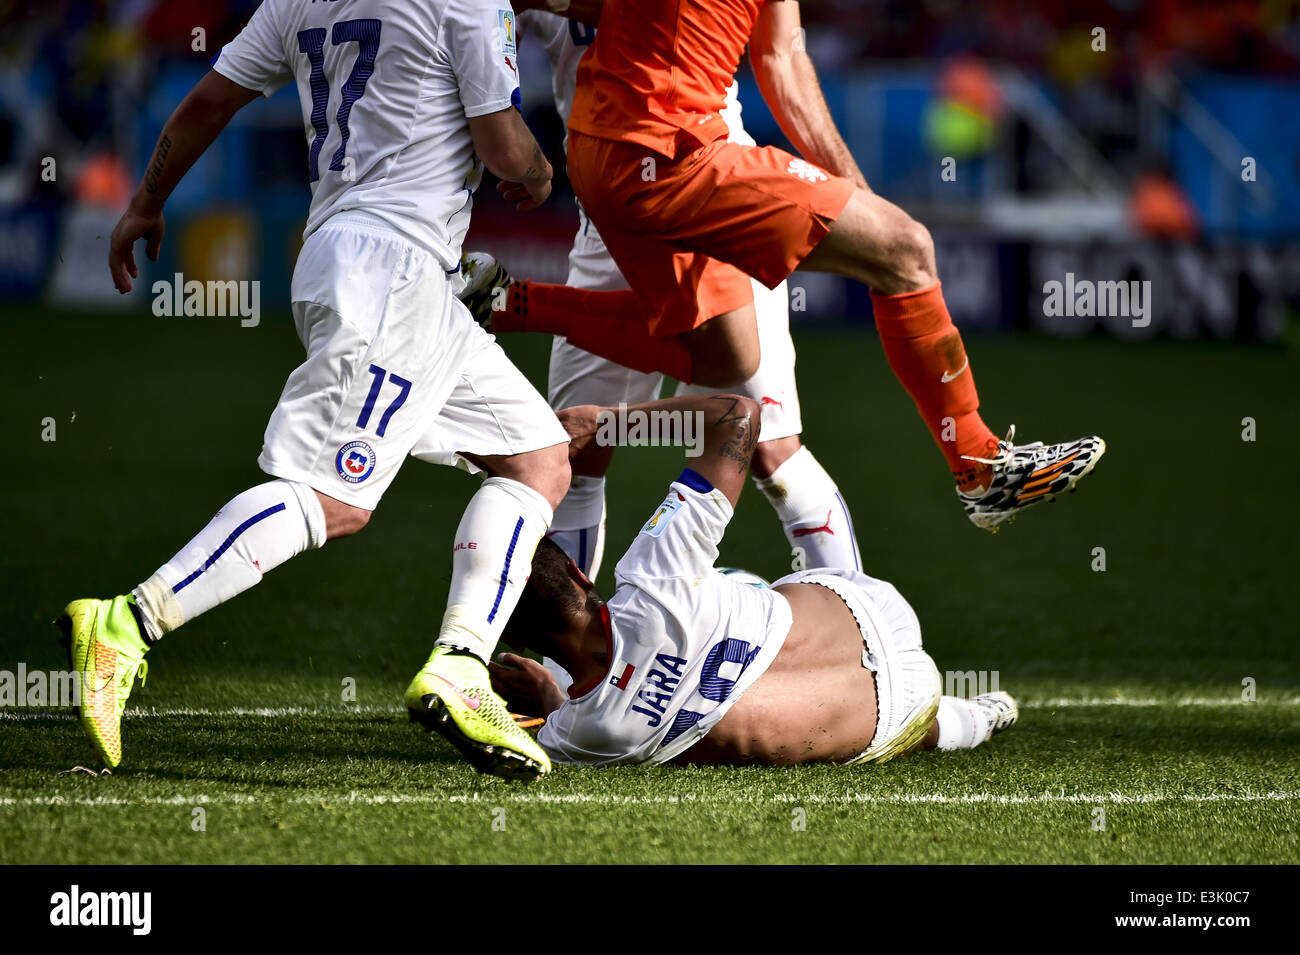 Sao Paolo, Brazil. 23rd June, 2014. Arjen Robben jumps over Gonzalo Jara (18) sliding to take out the ball at the match #36 of the 2014 World Cup, between Netherlands and Chile, this monday, June 23rd, in Sao Paulo, Brasil Credit:  Gustavo Basso/NurPhoto/ZUMAPRESS.com/Alamy Live News Stock Photo